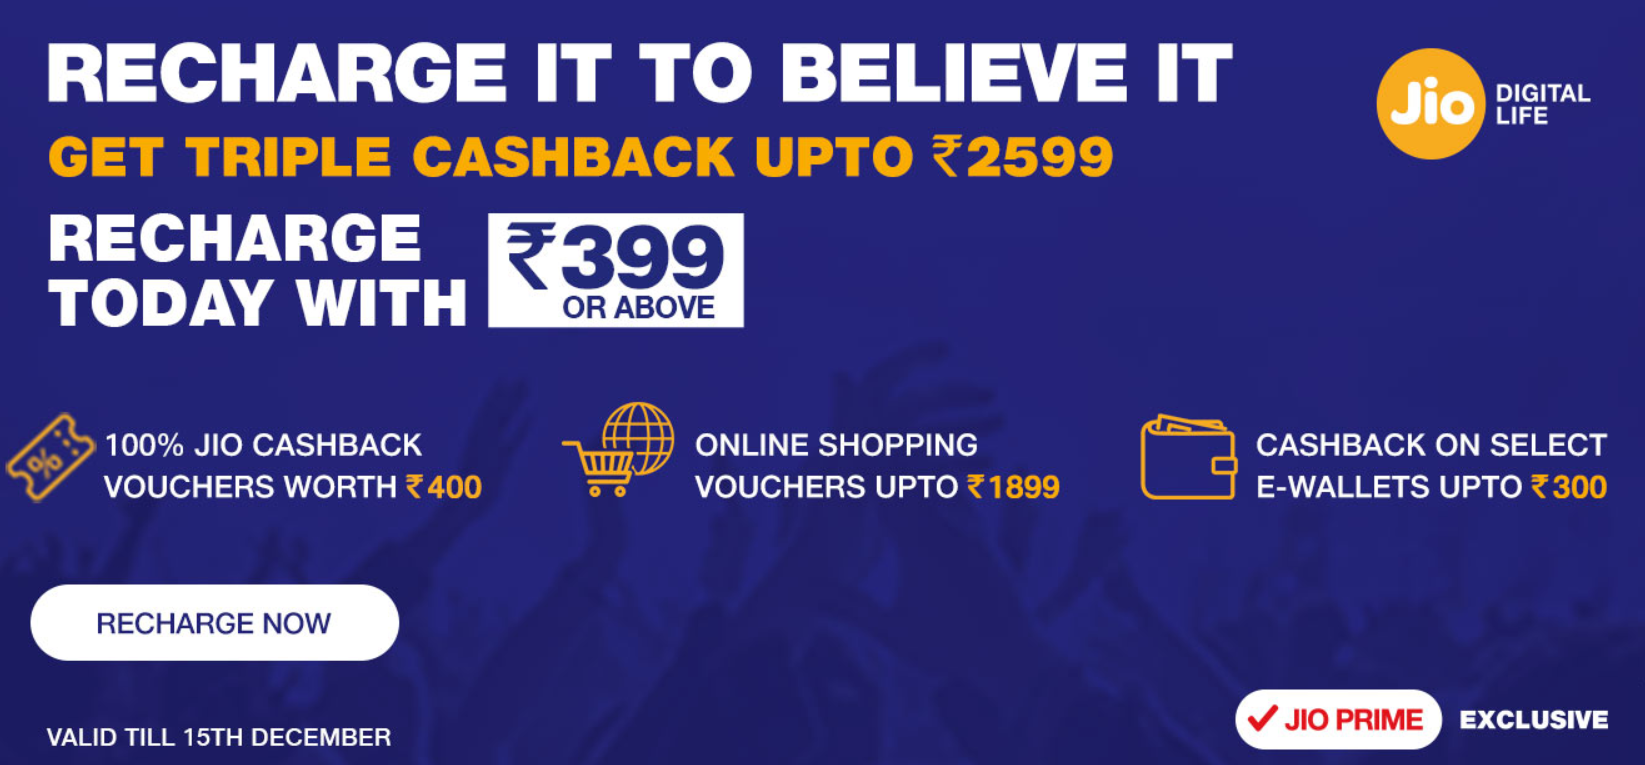 You can use Reliance Jio's Triple cashback offer until December 15 1